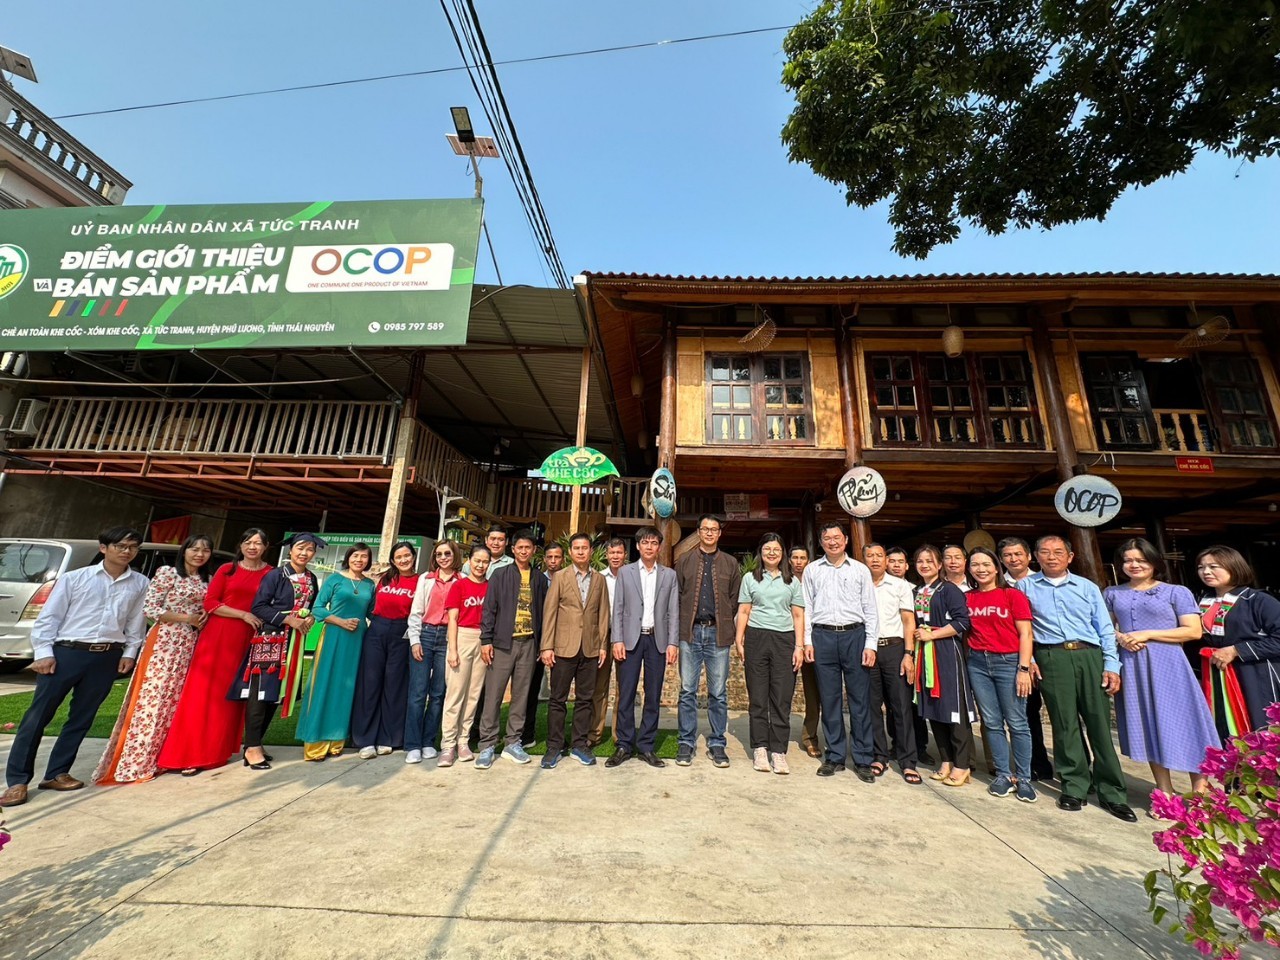 Tea and Coffee Institute at Mae Fah Luang University, Maejo University and TICA Hold “Tea Processing in Vietnam” Training Programme